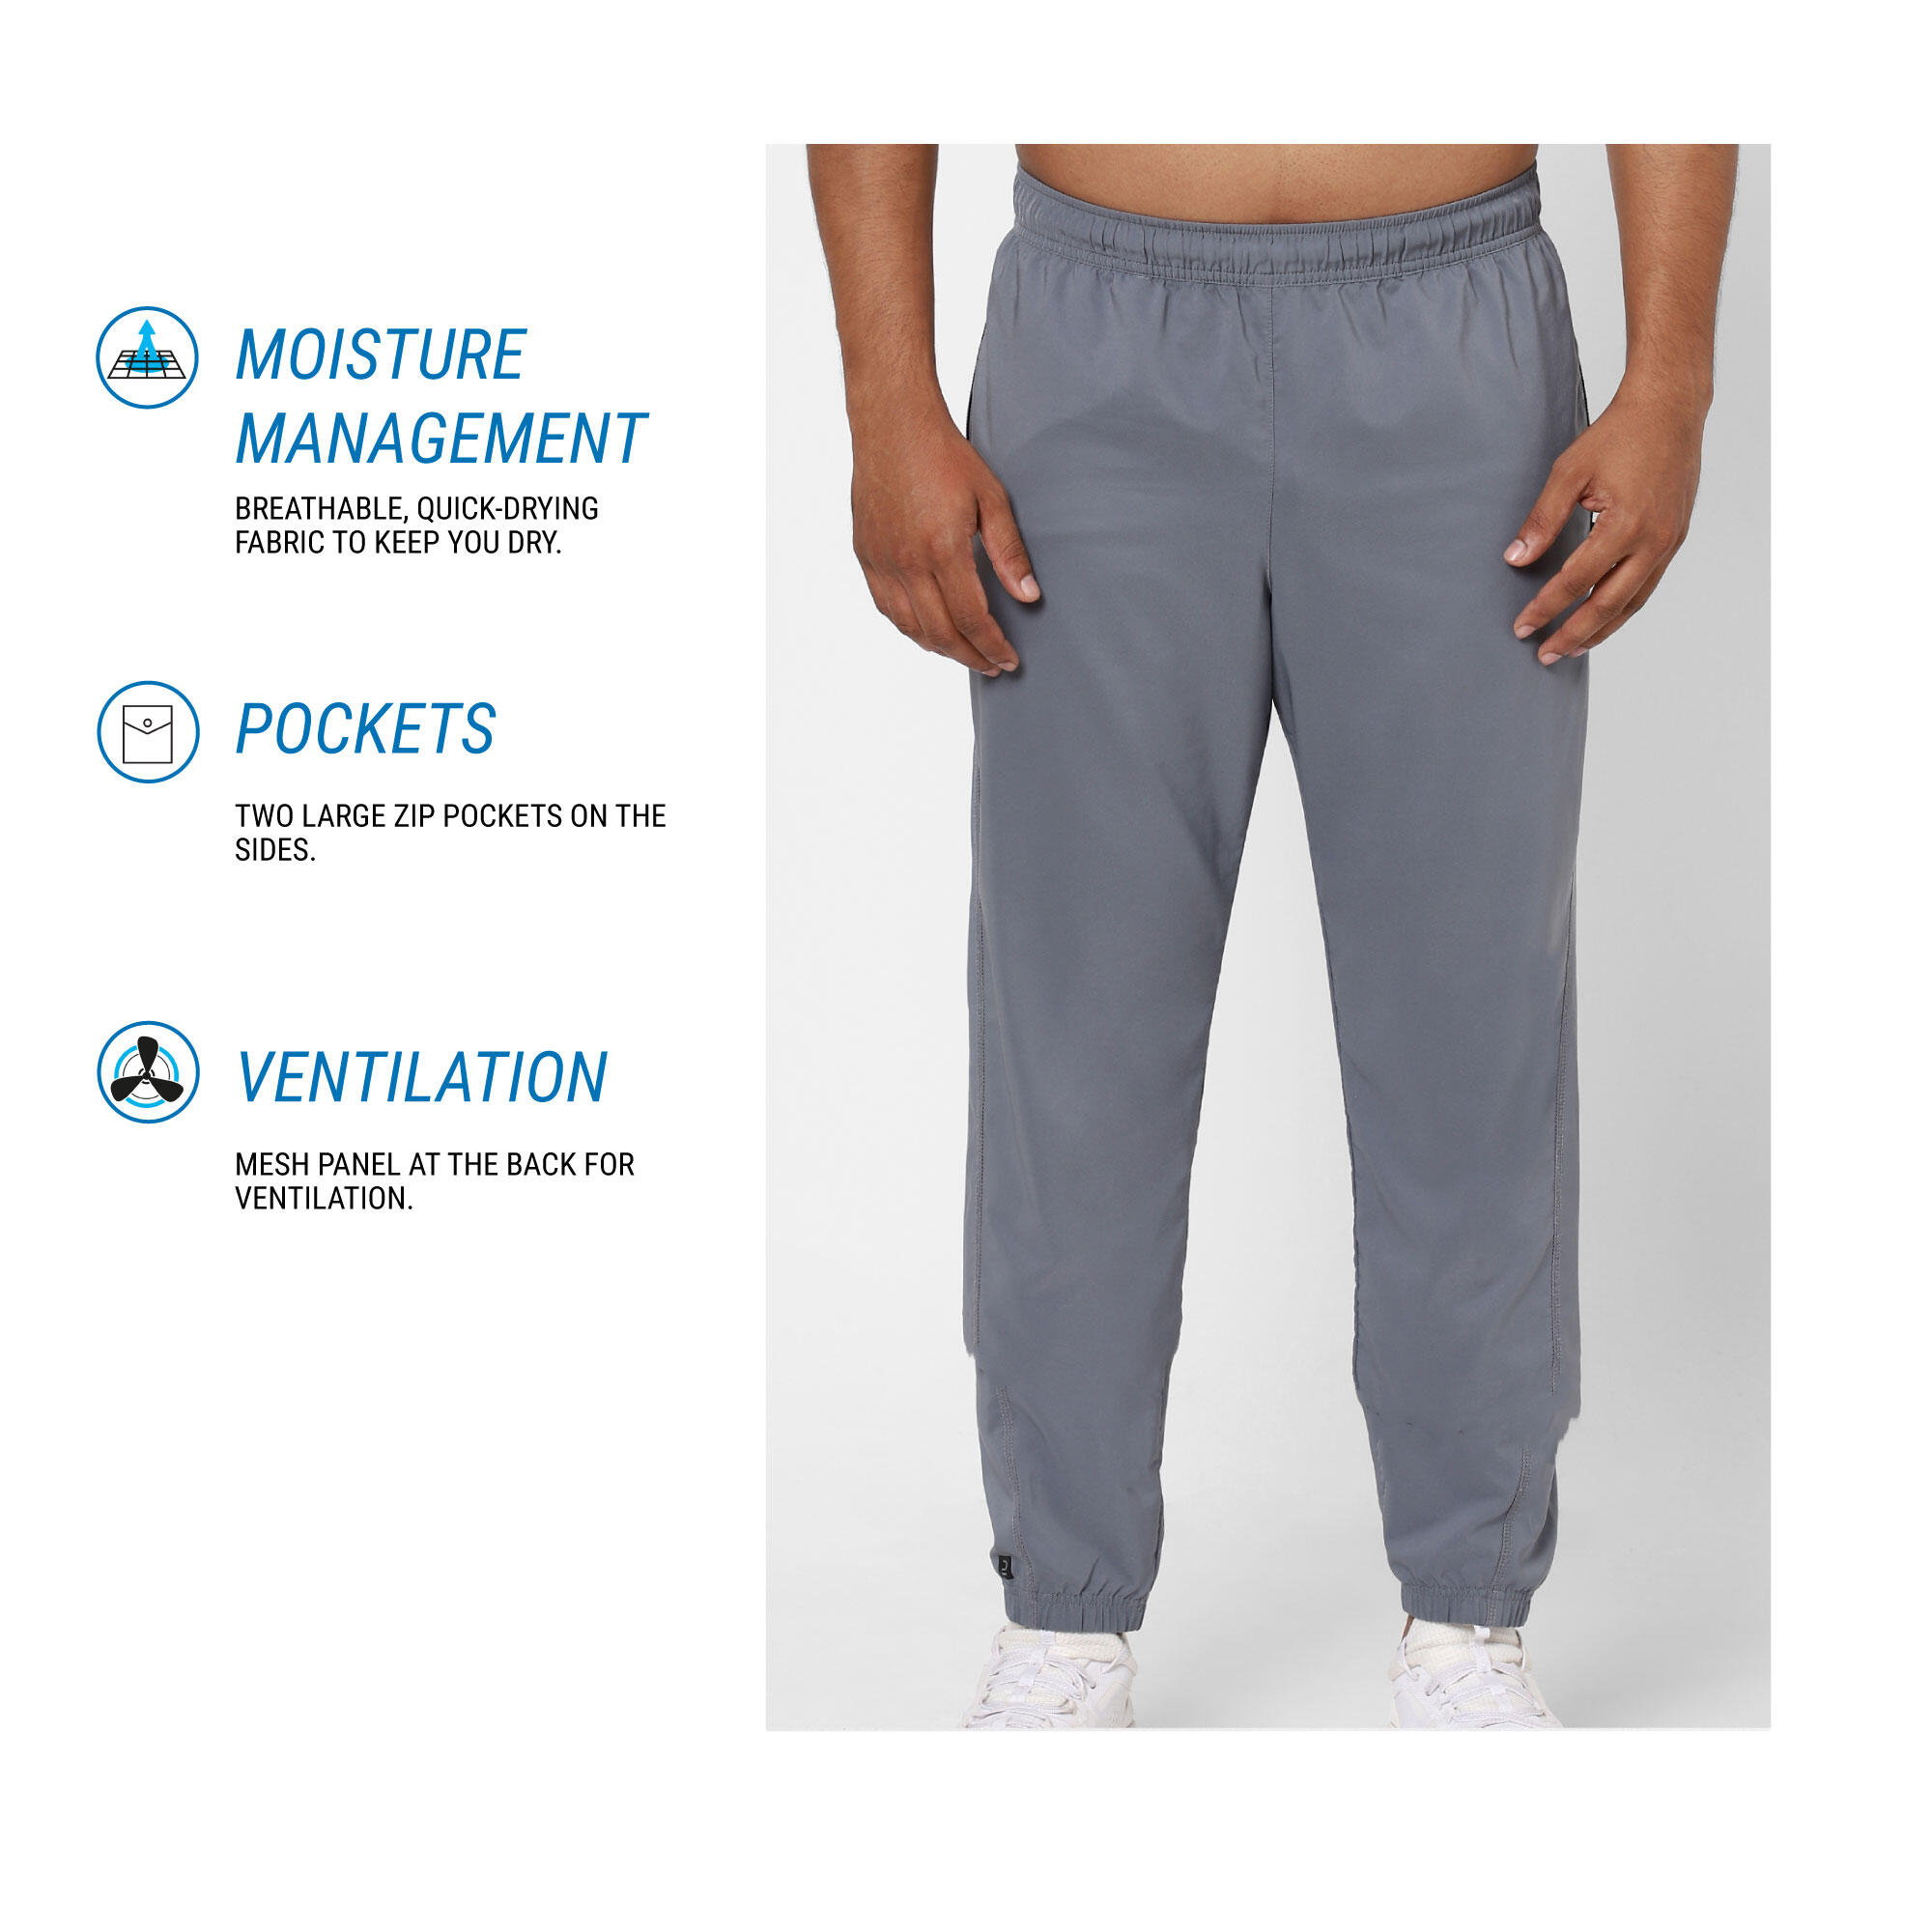 QUECHUA Forclaz 50 Men's Hiking Fleece Trousers By Decathlon - Buy QUECHUA  Forclaz 50 Men's Hiking Fleece Trousers By Decathlon Online at Best Prices  in India on Snapdeal